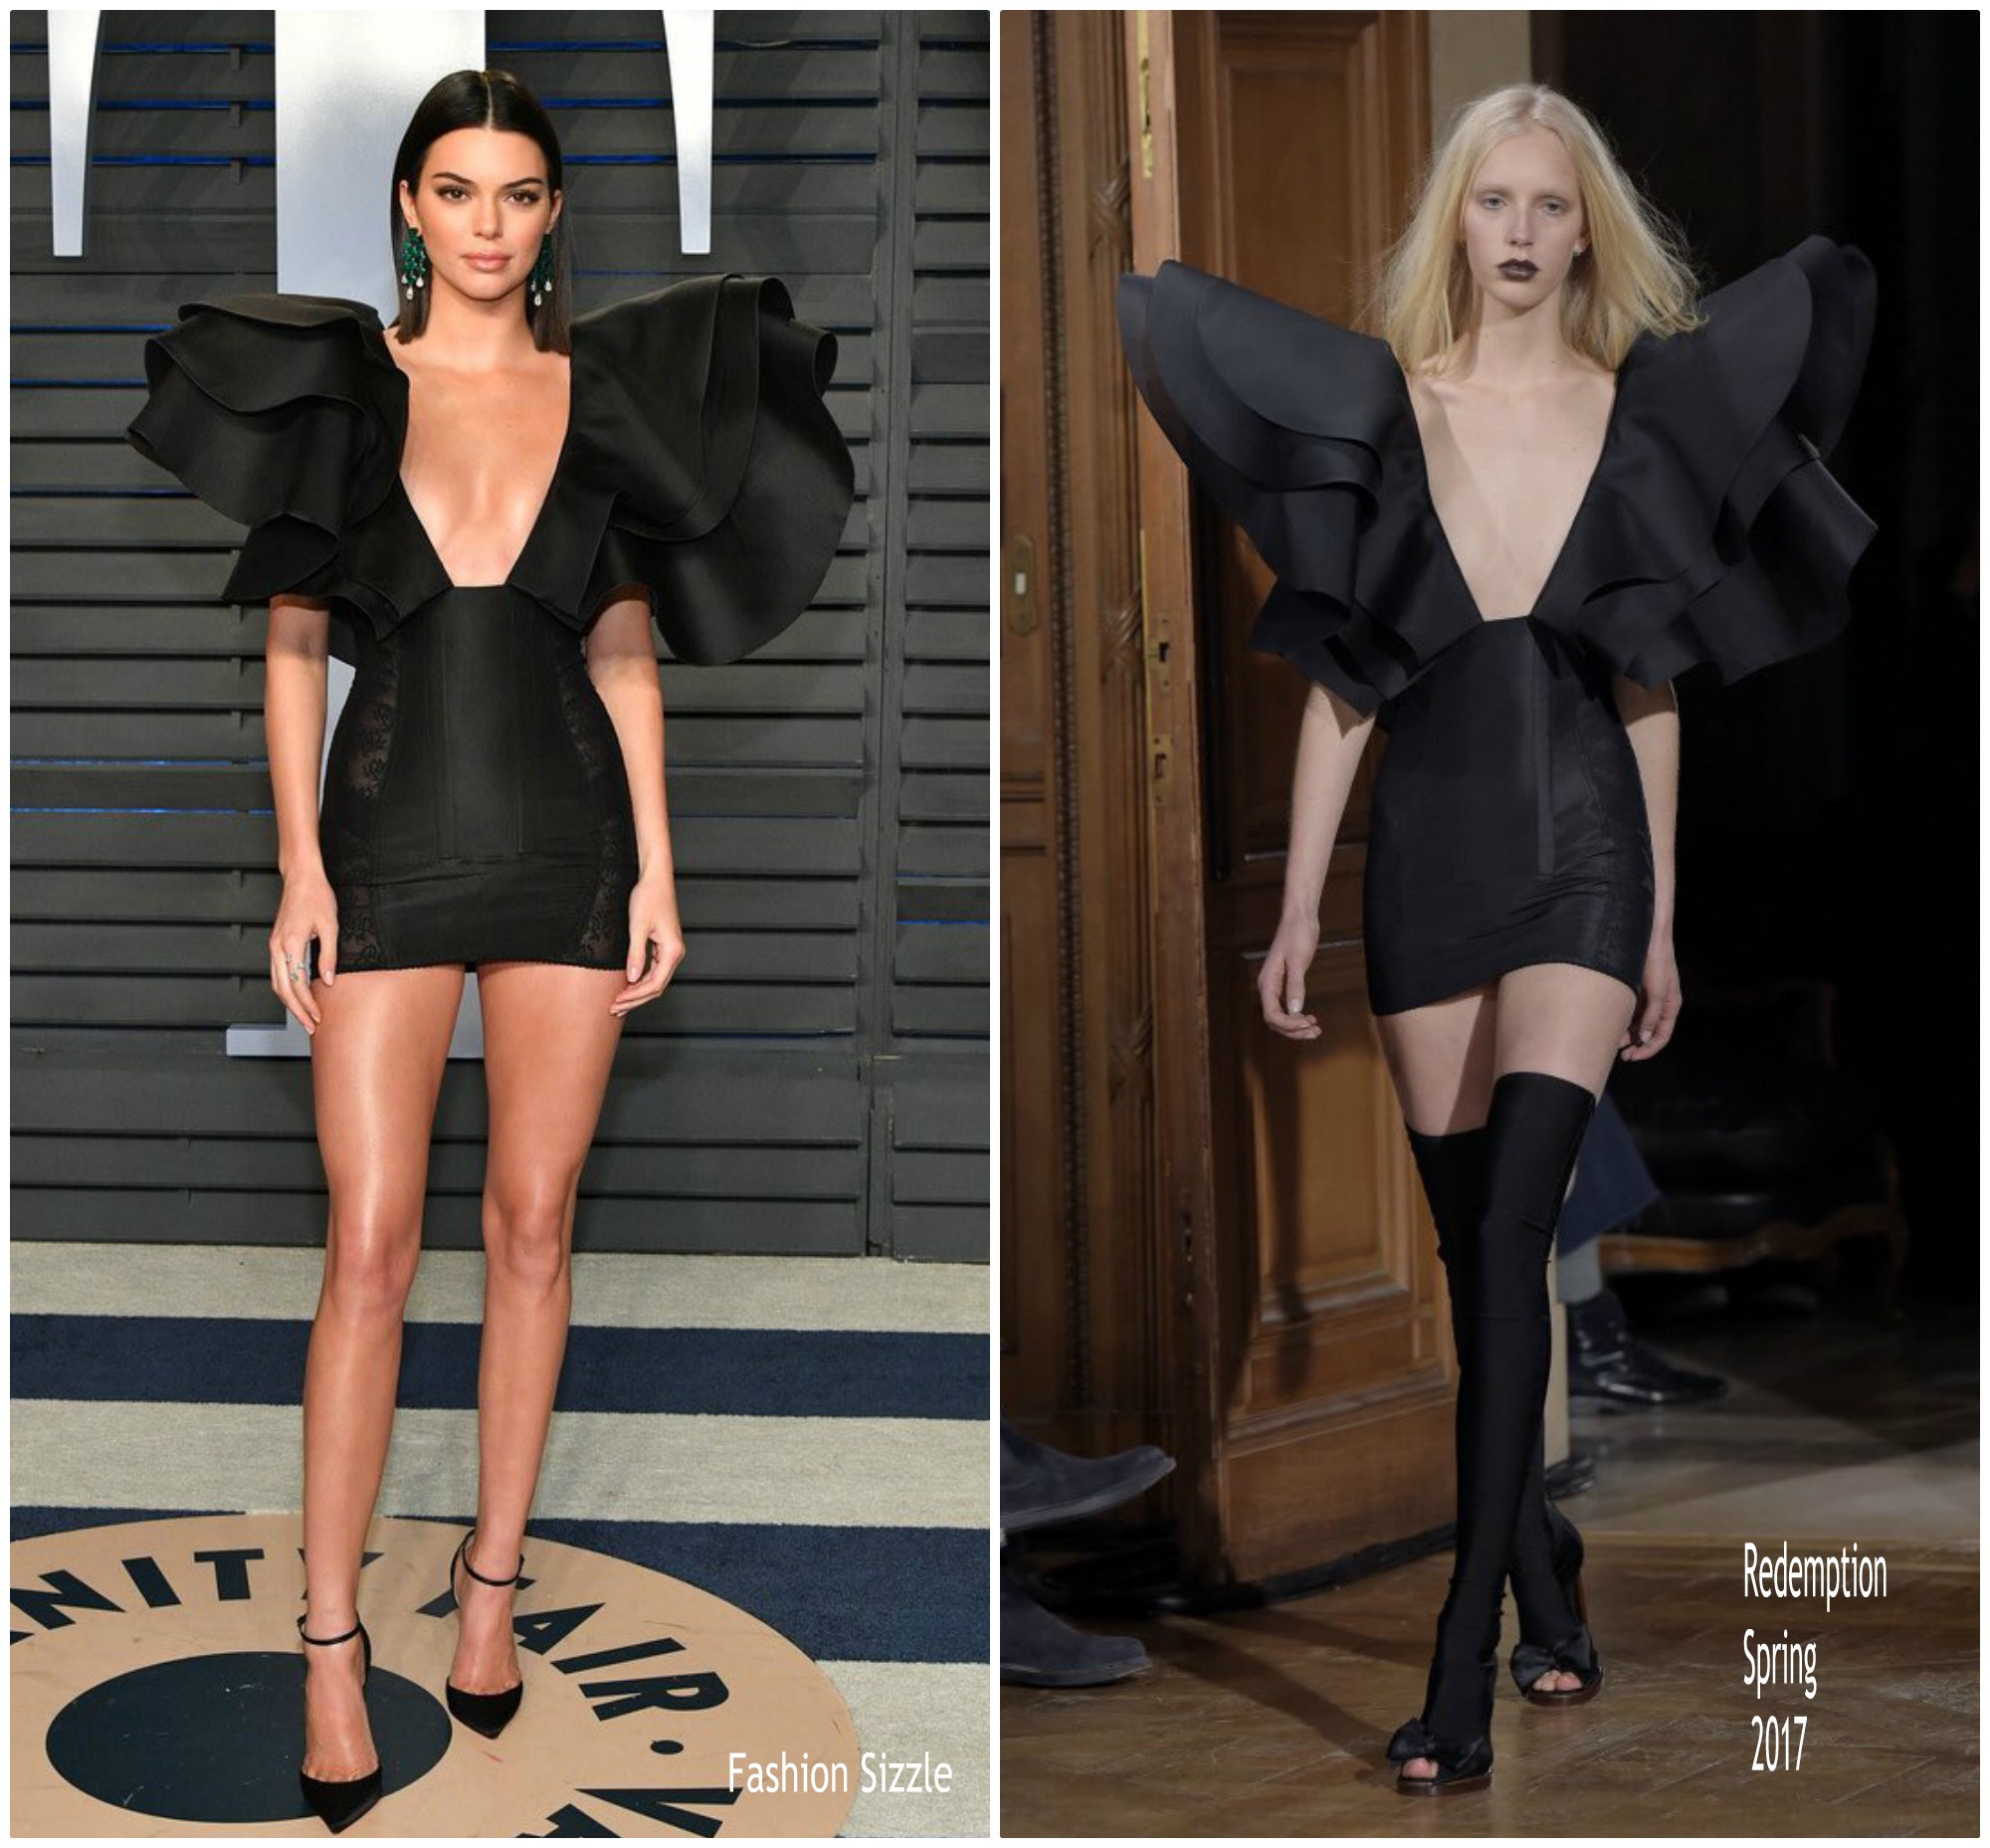 kendall-jenner-in-redemption-2018-vanity-fair-oscar-party